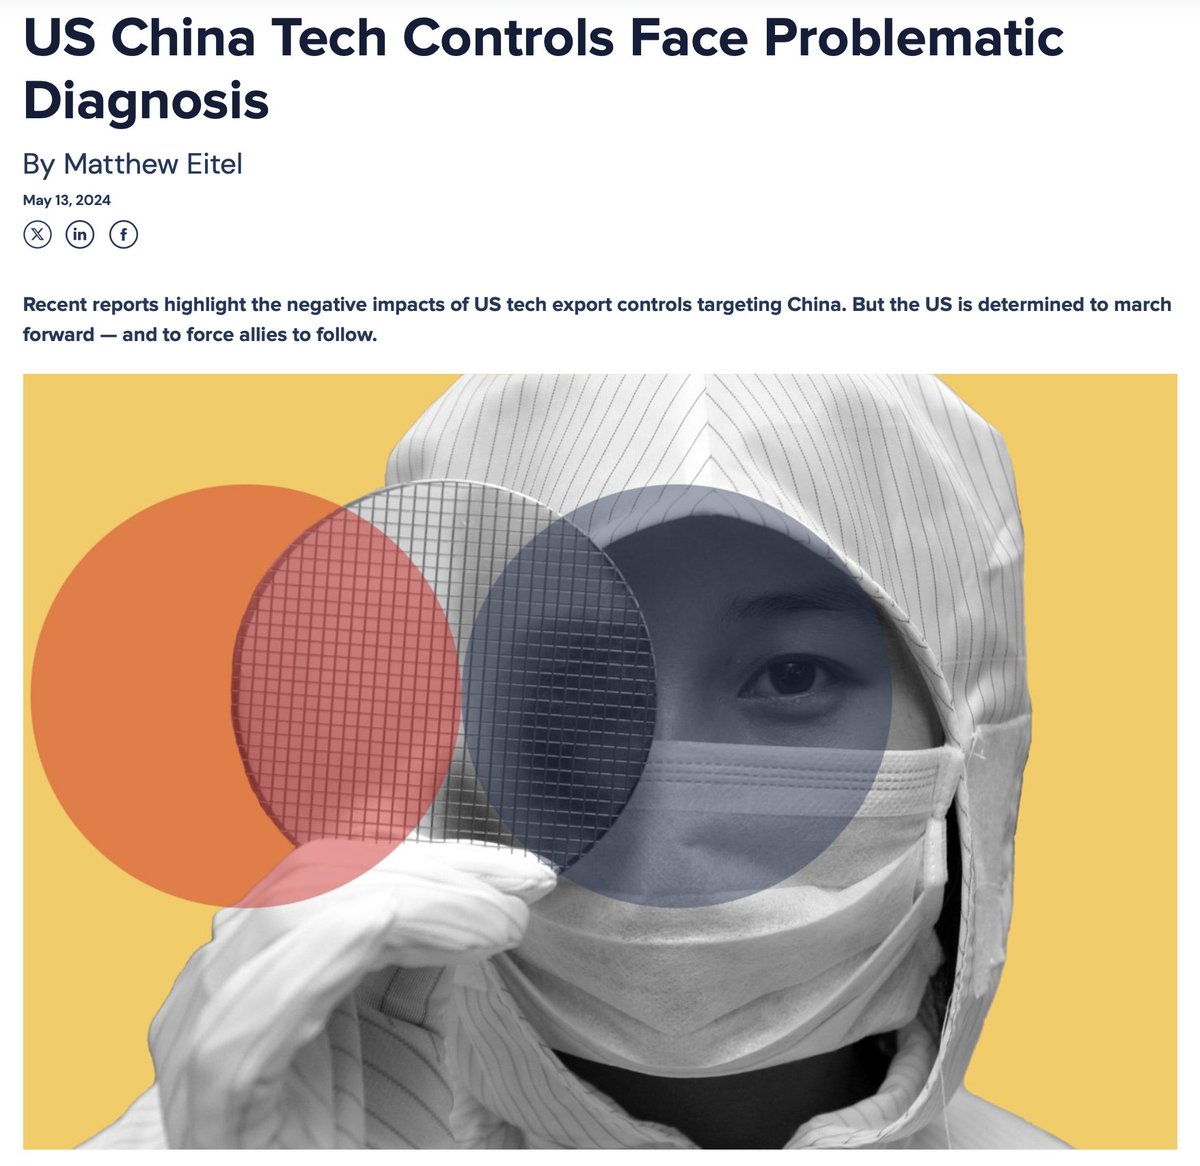 It doesn't look like US tech sanctions on China are working out so well according to this article by CEPA, here are some of the highlights:

US export controls aim to maintain a technological lead over China in semiconductors, but two new studies indicate these measures are…